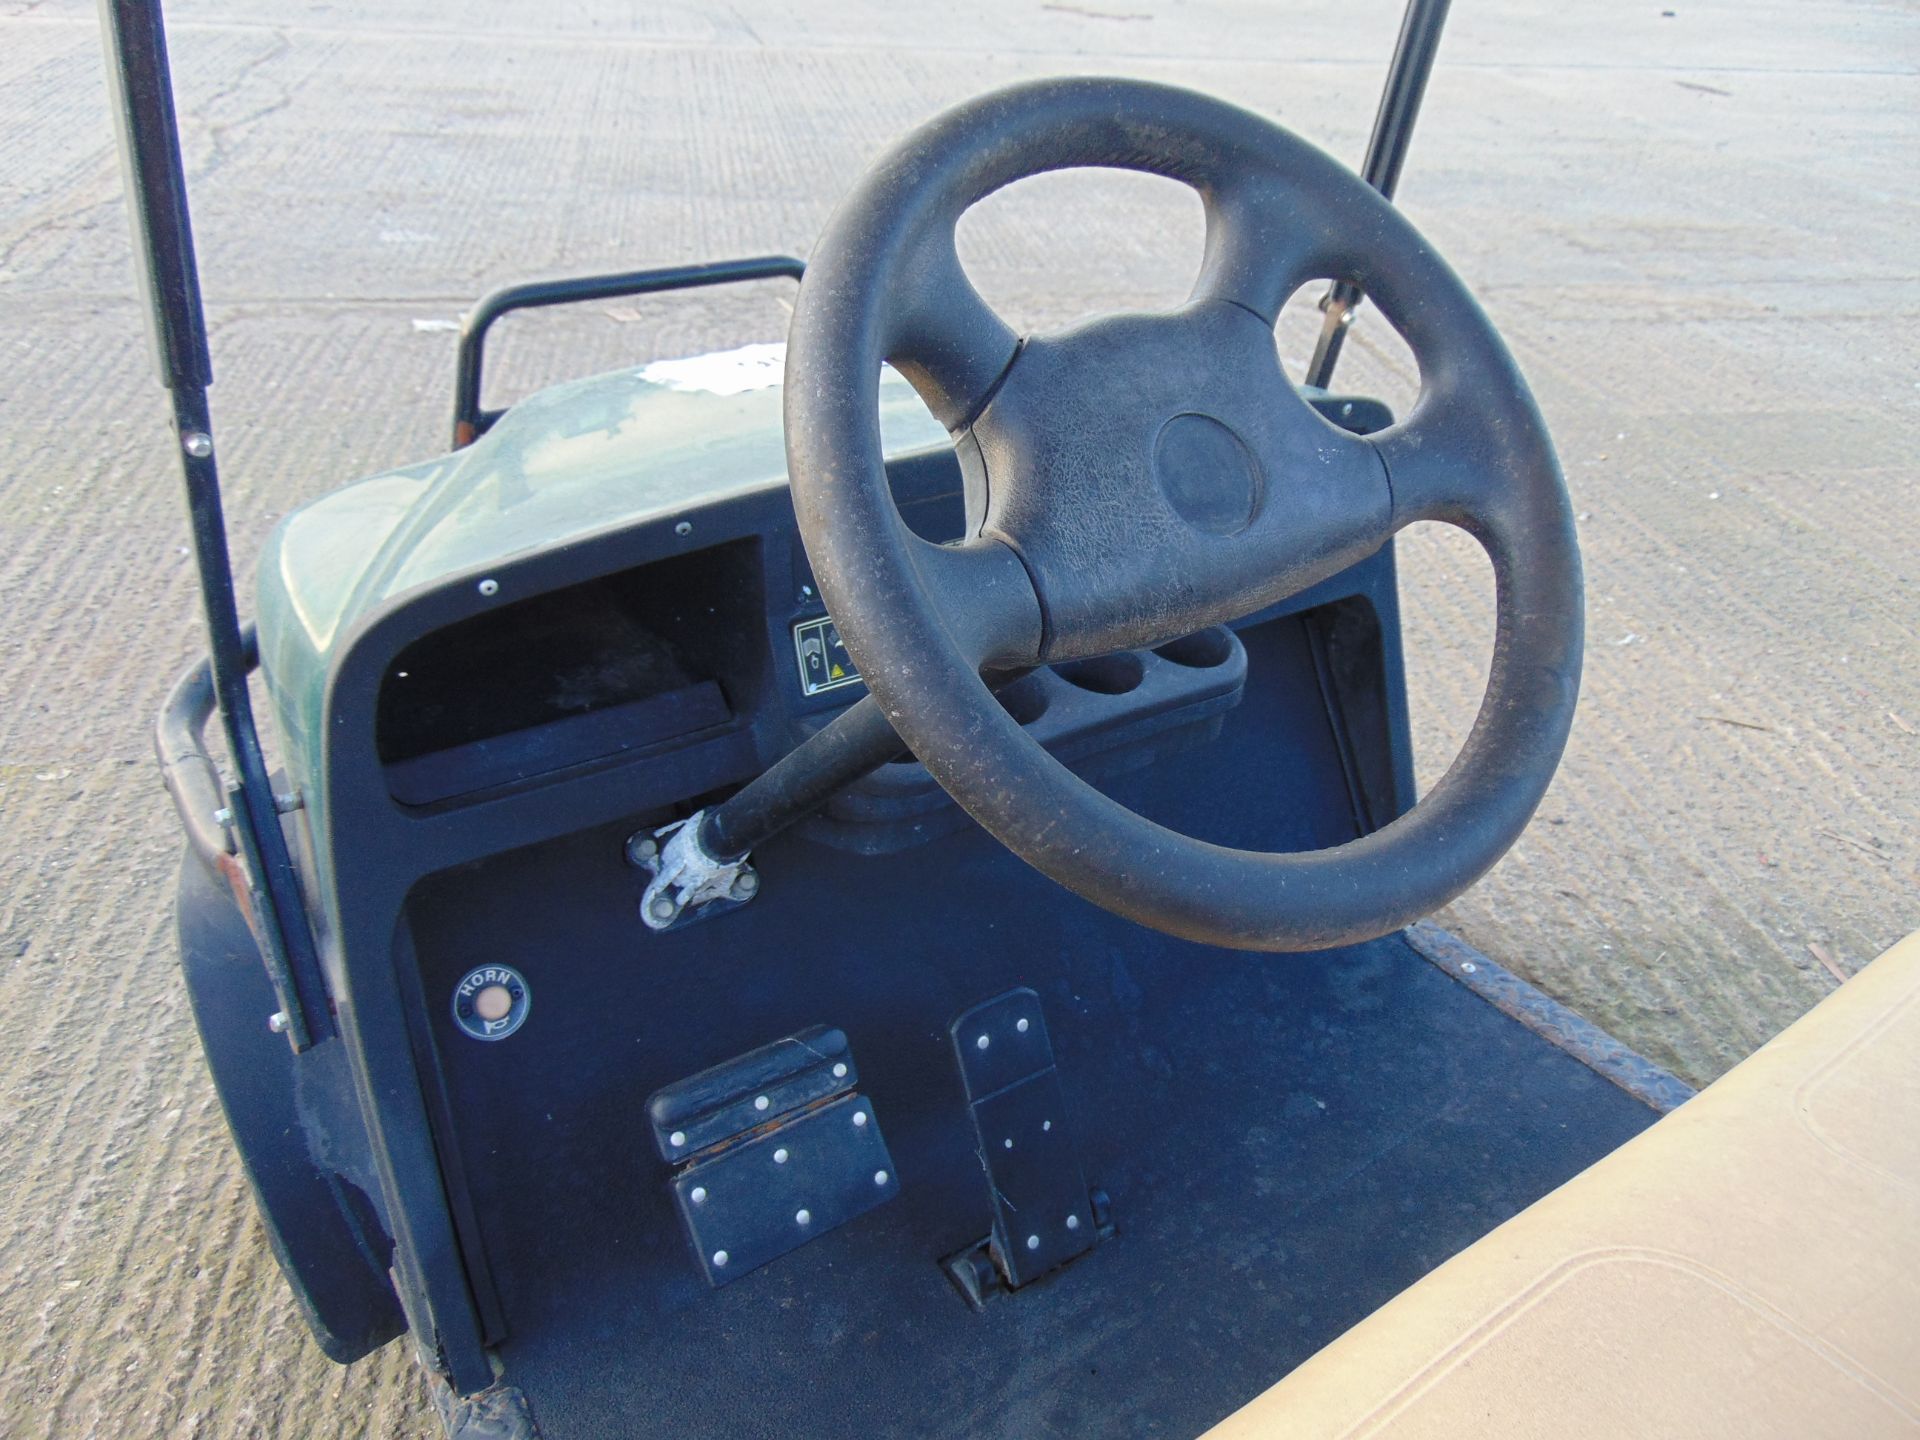 EZGO MPD Turf Master Truck with Tipping Body Batteries and on Board Charger 1700 hrs only - Image 3 of 13